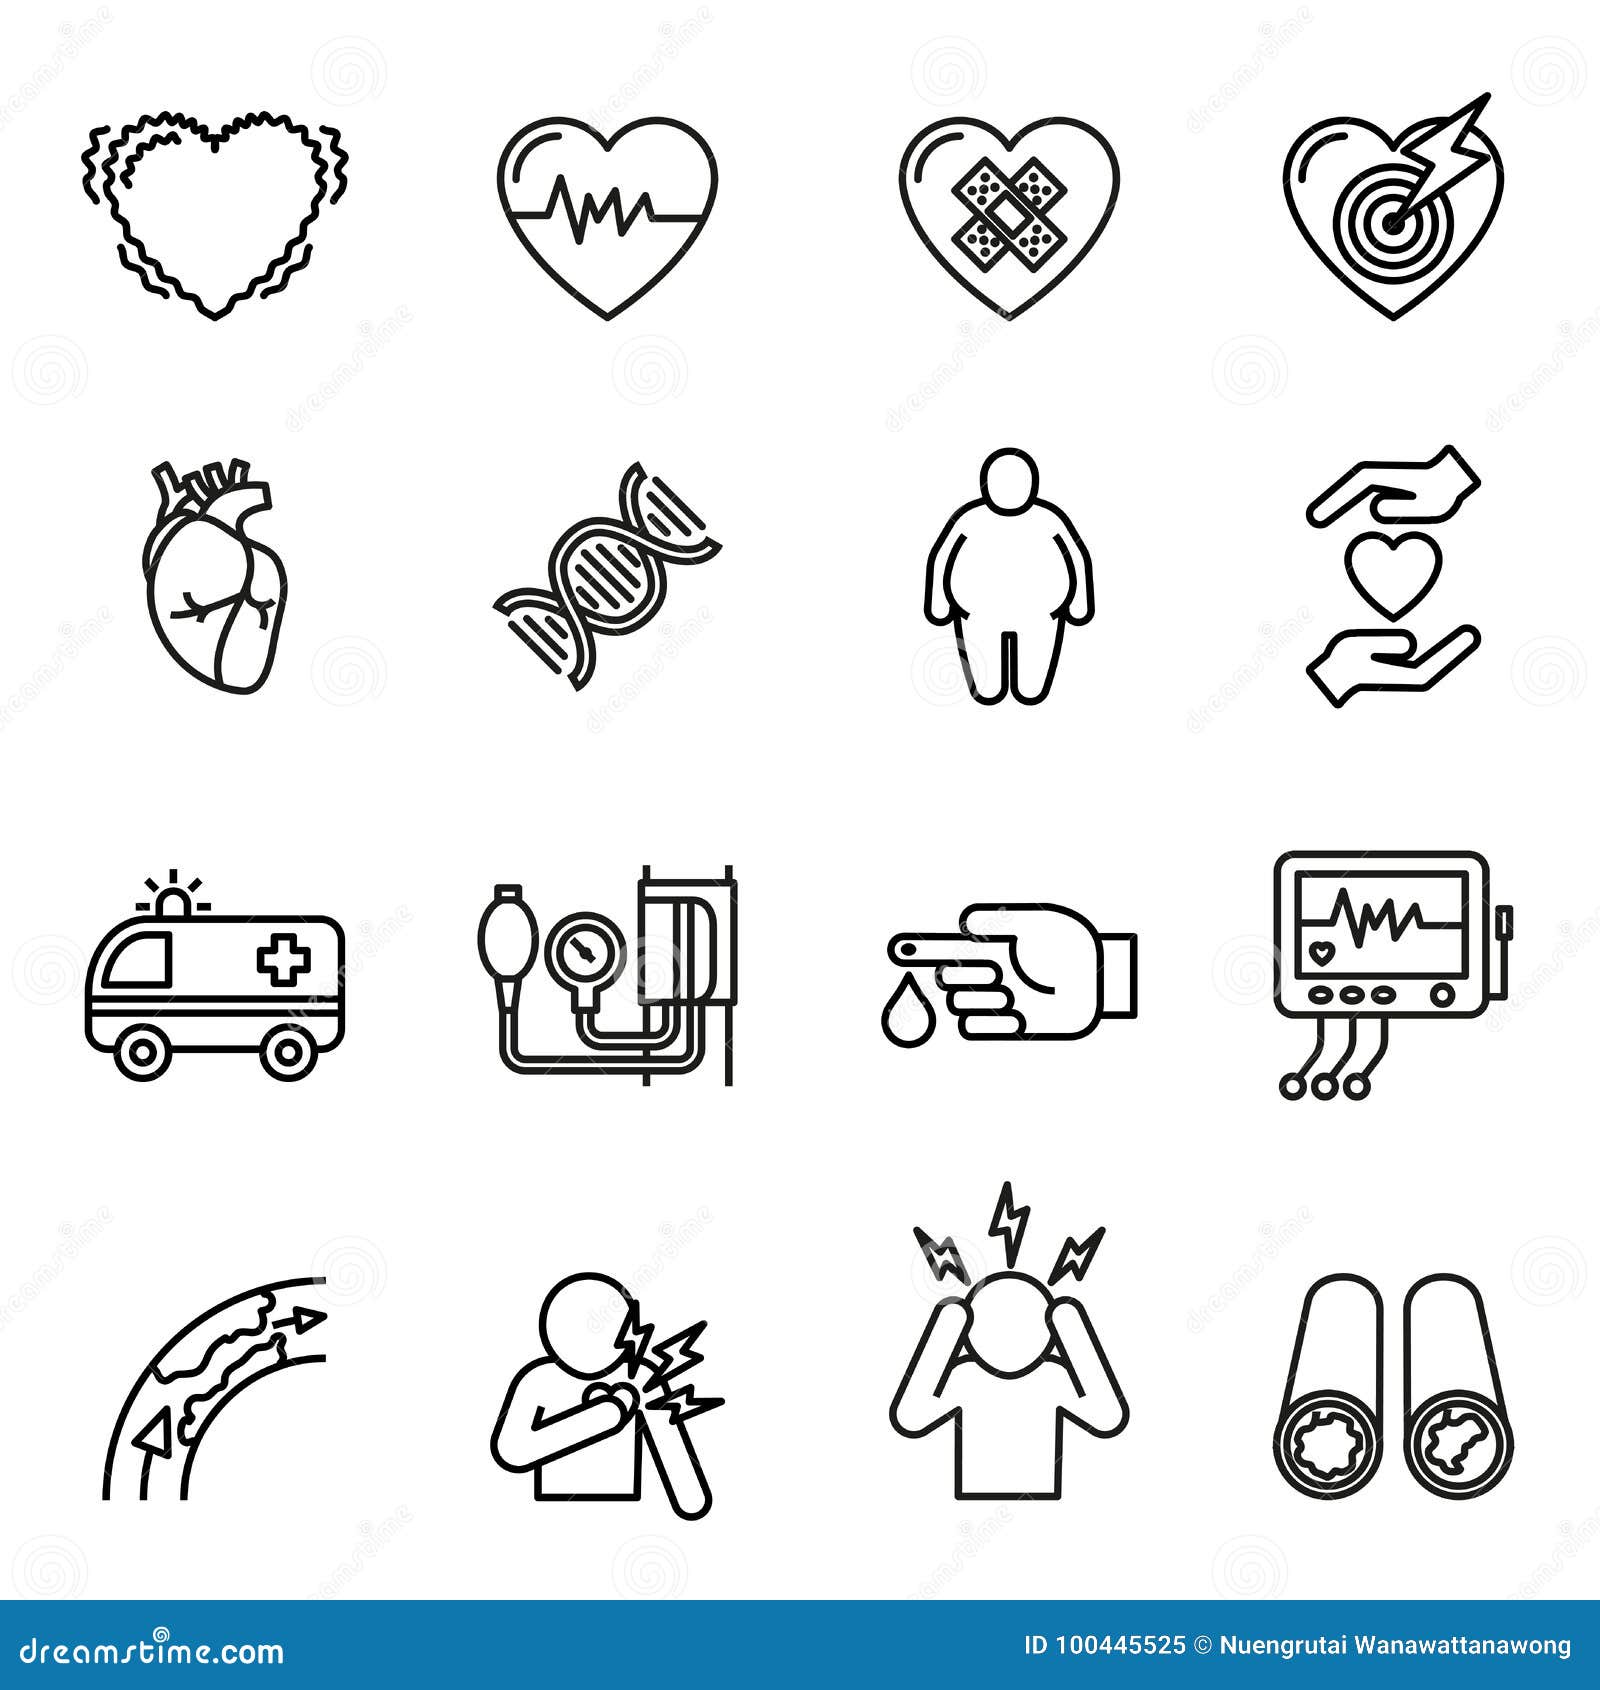 heart disease, heart attack and symptoms icons set.